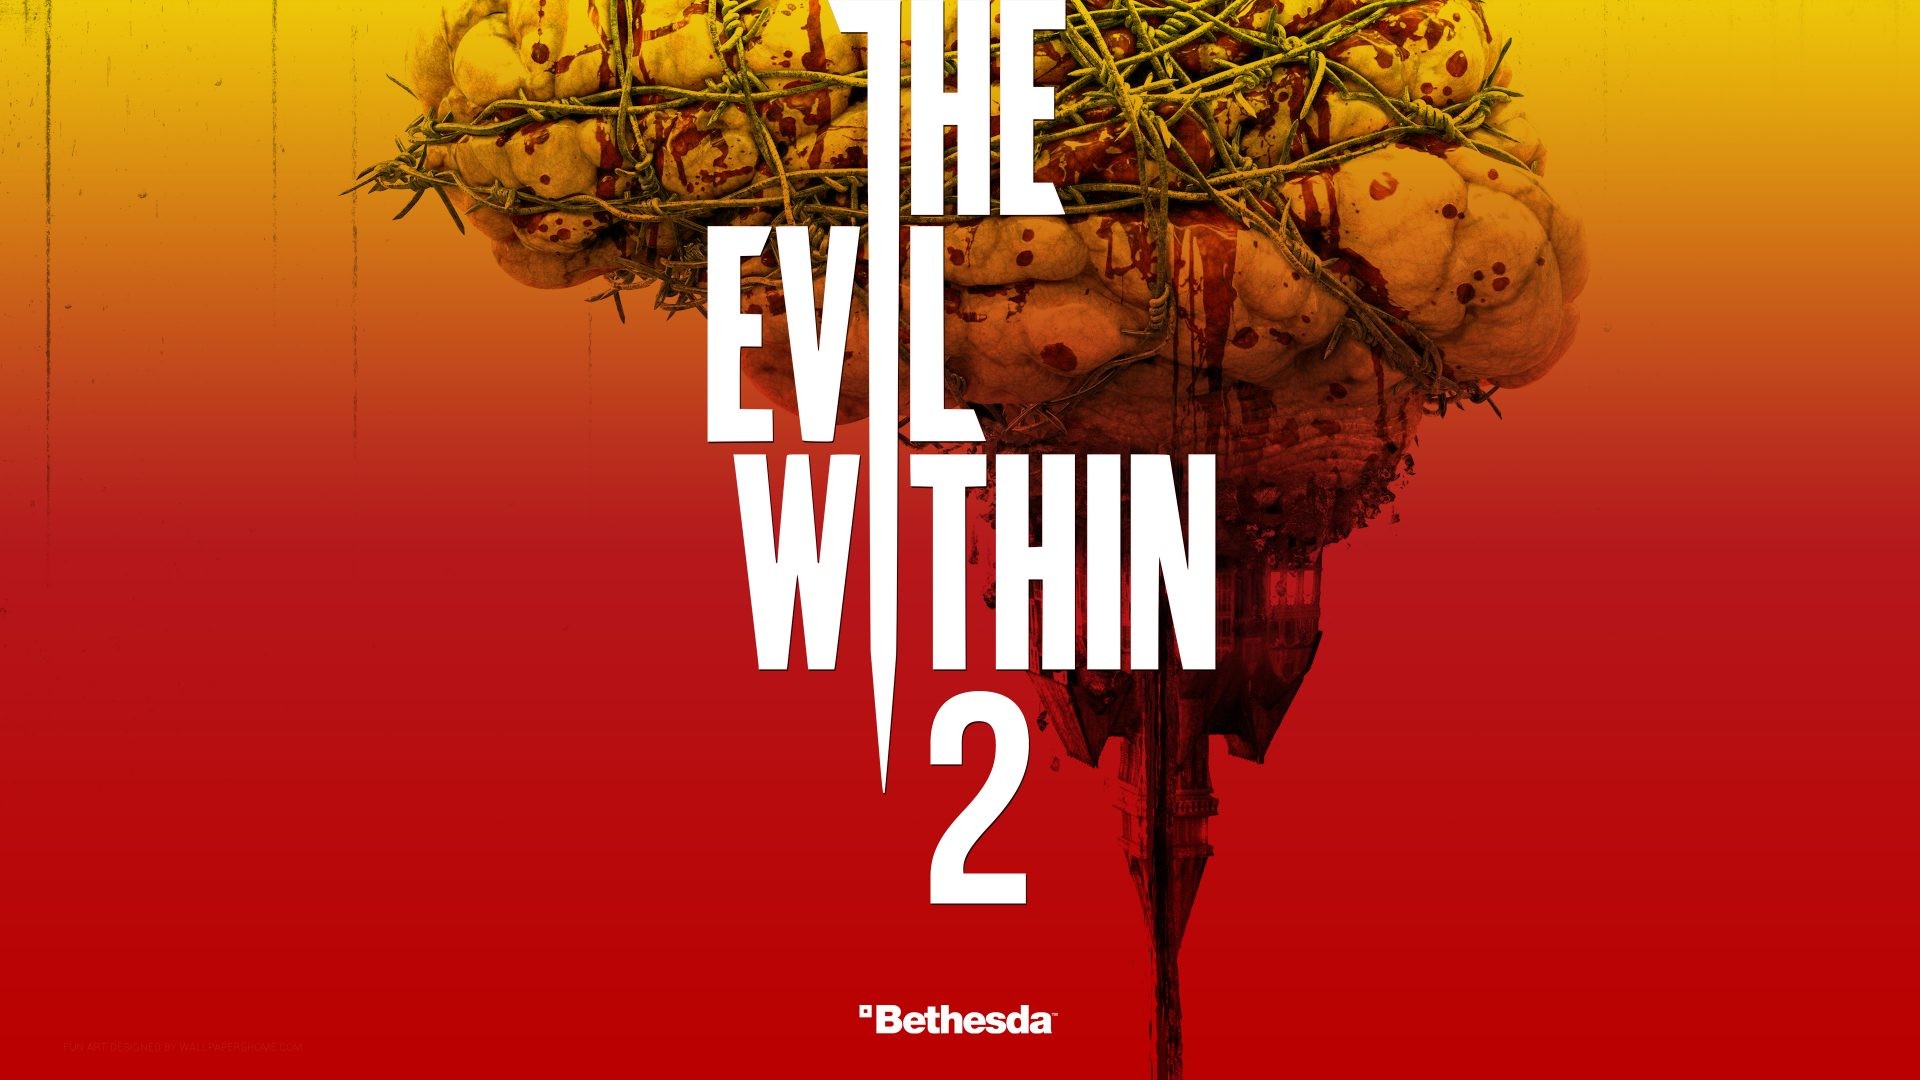 1920x1080 The Evil Within 2 E3 20174k window background wallpaper